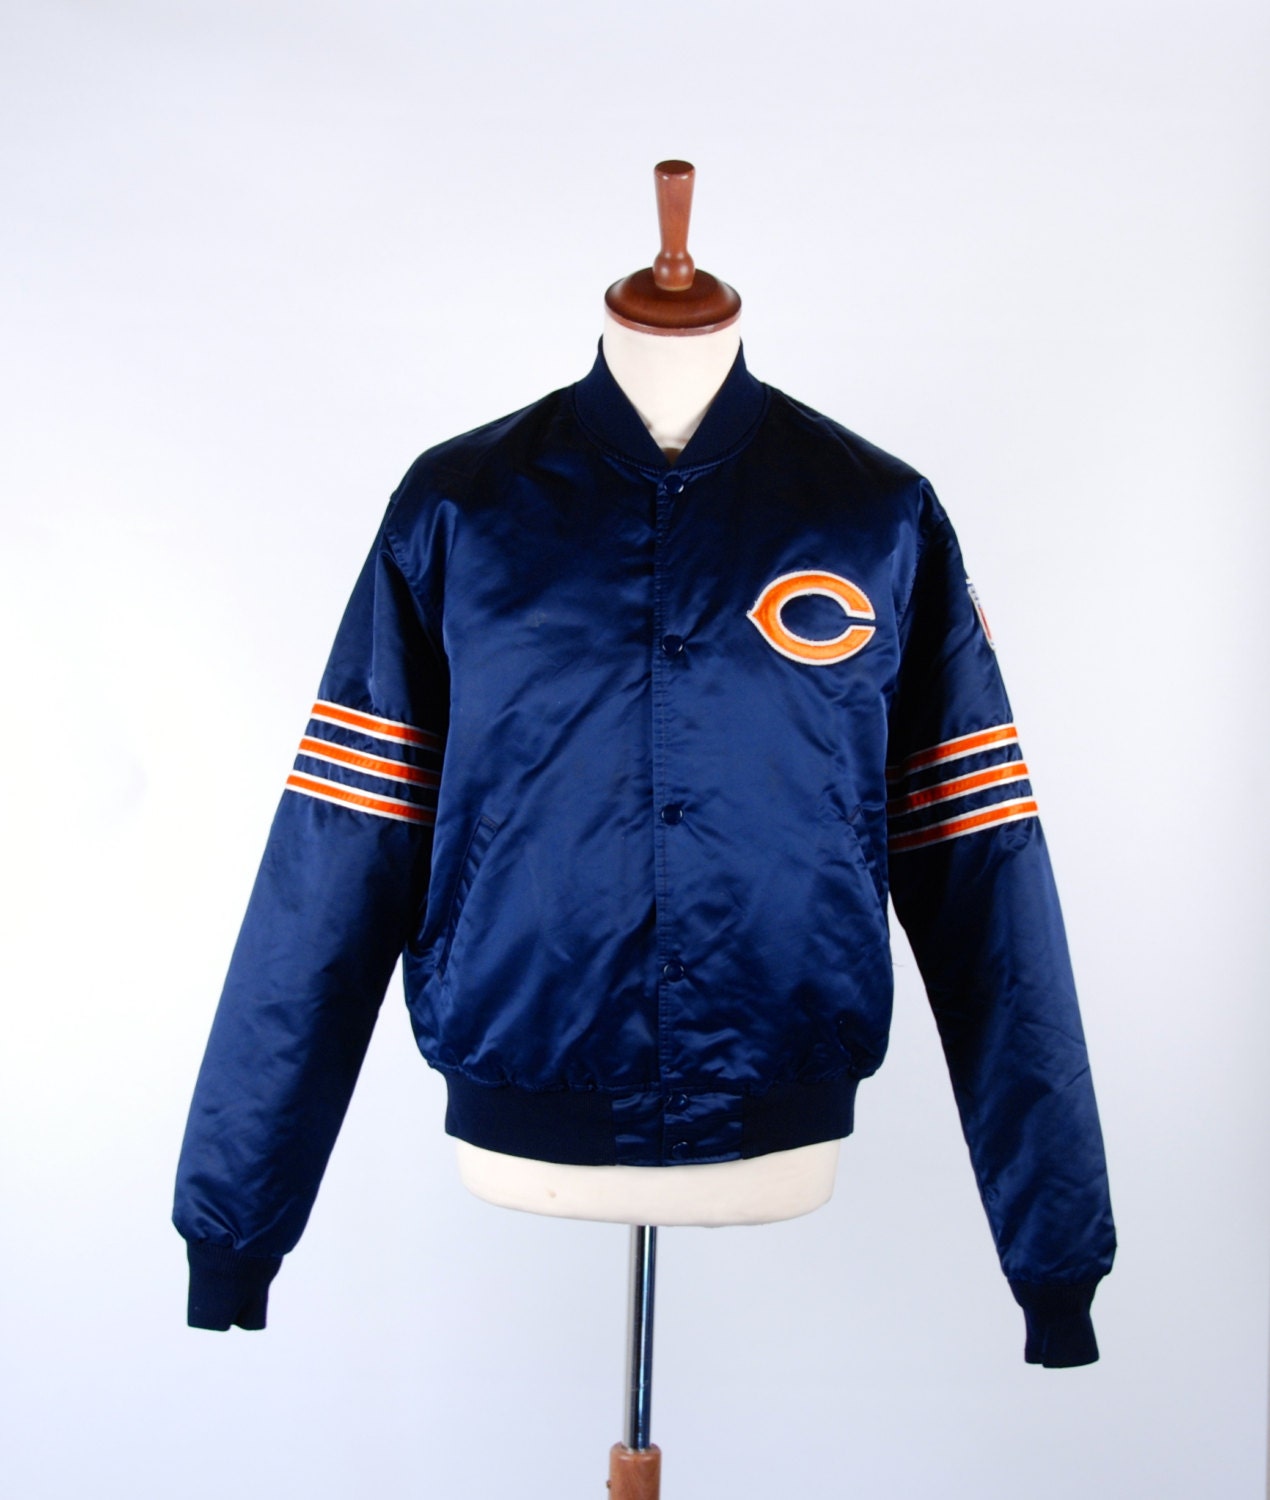 1980's Chicago Bears Satin Jacket in Excellent Condition